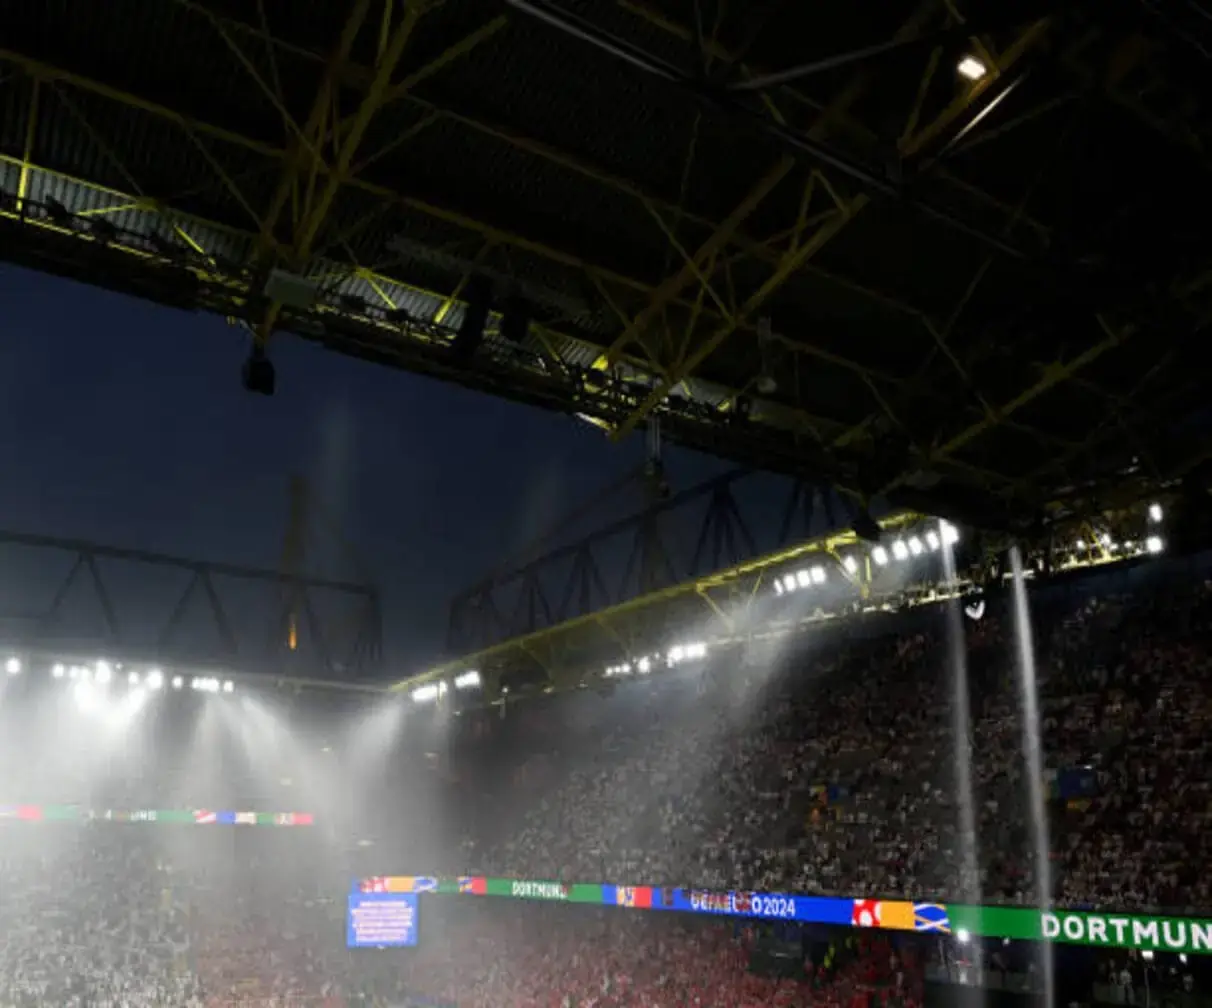 A Hooded Man on the Stadium Roof was the Reason for the Late Start of Germany vs Denmark